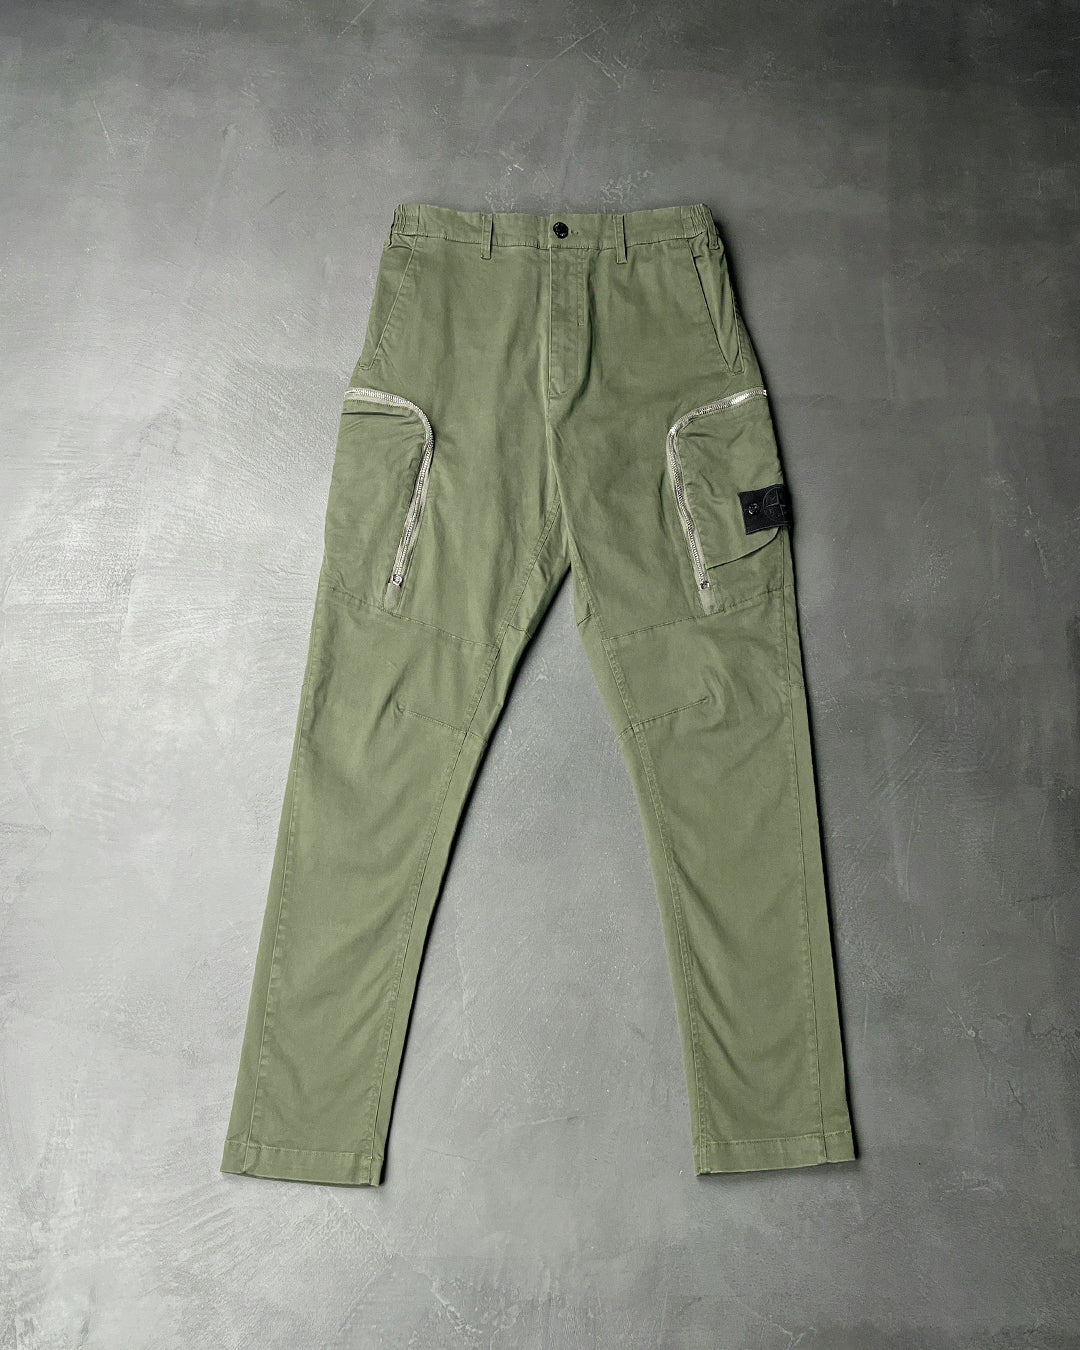 30508 Shadow Project Zip Cargo Pants Olive SI0158-OL